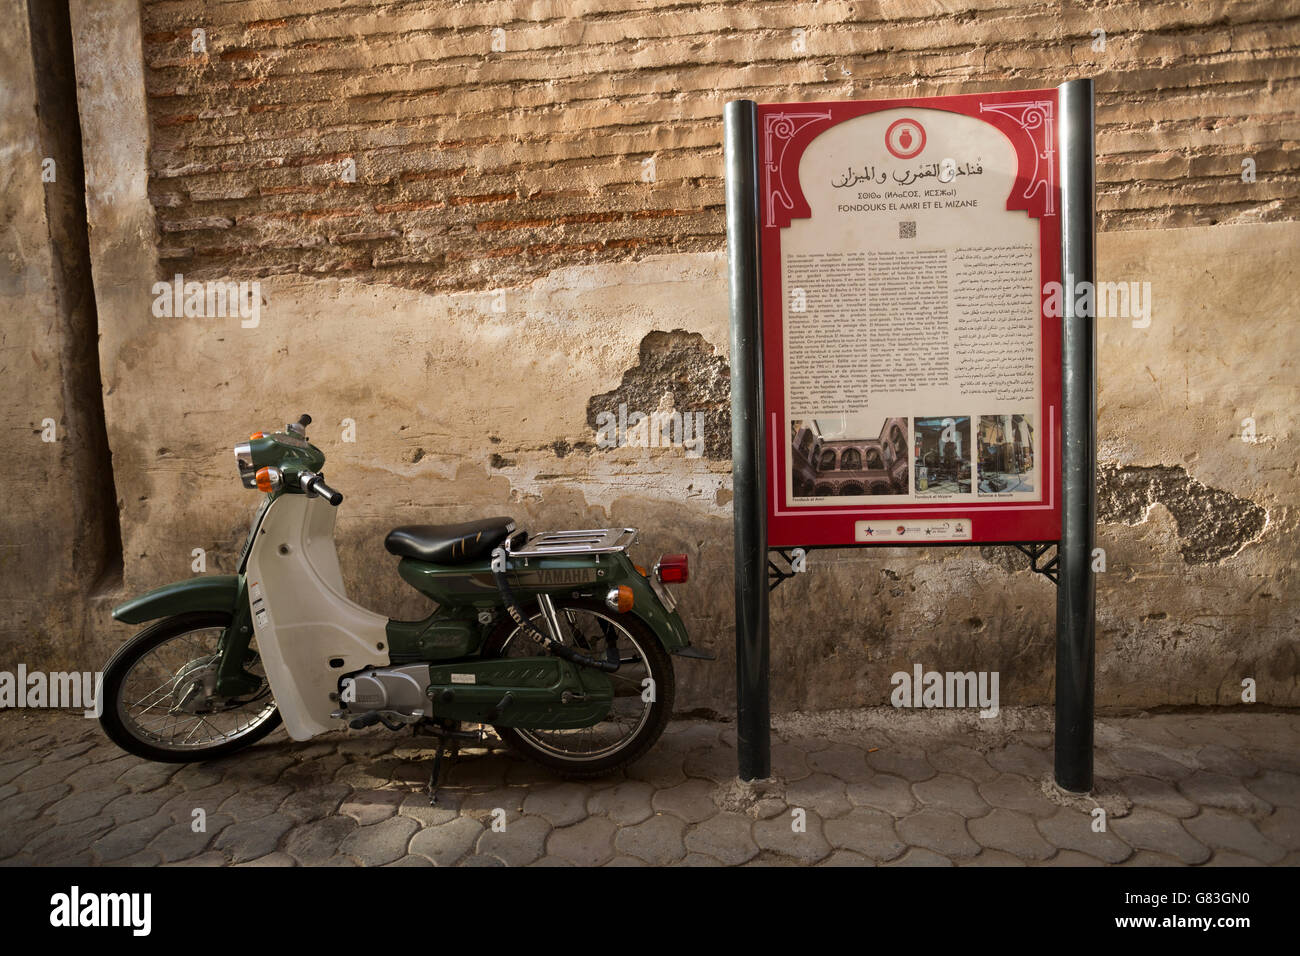 A cultural site marker stands along a narrow street in the Marrakesh Medina, Morocco. Stock Photo